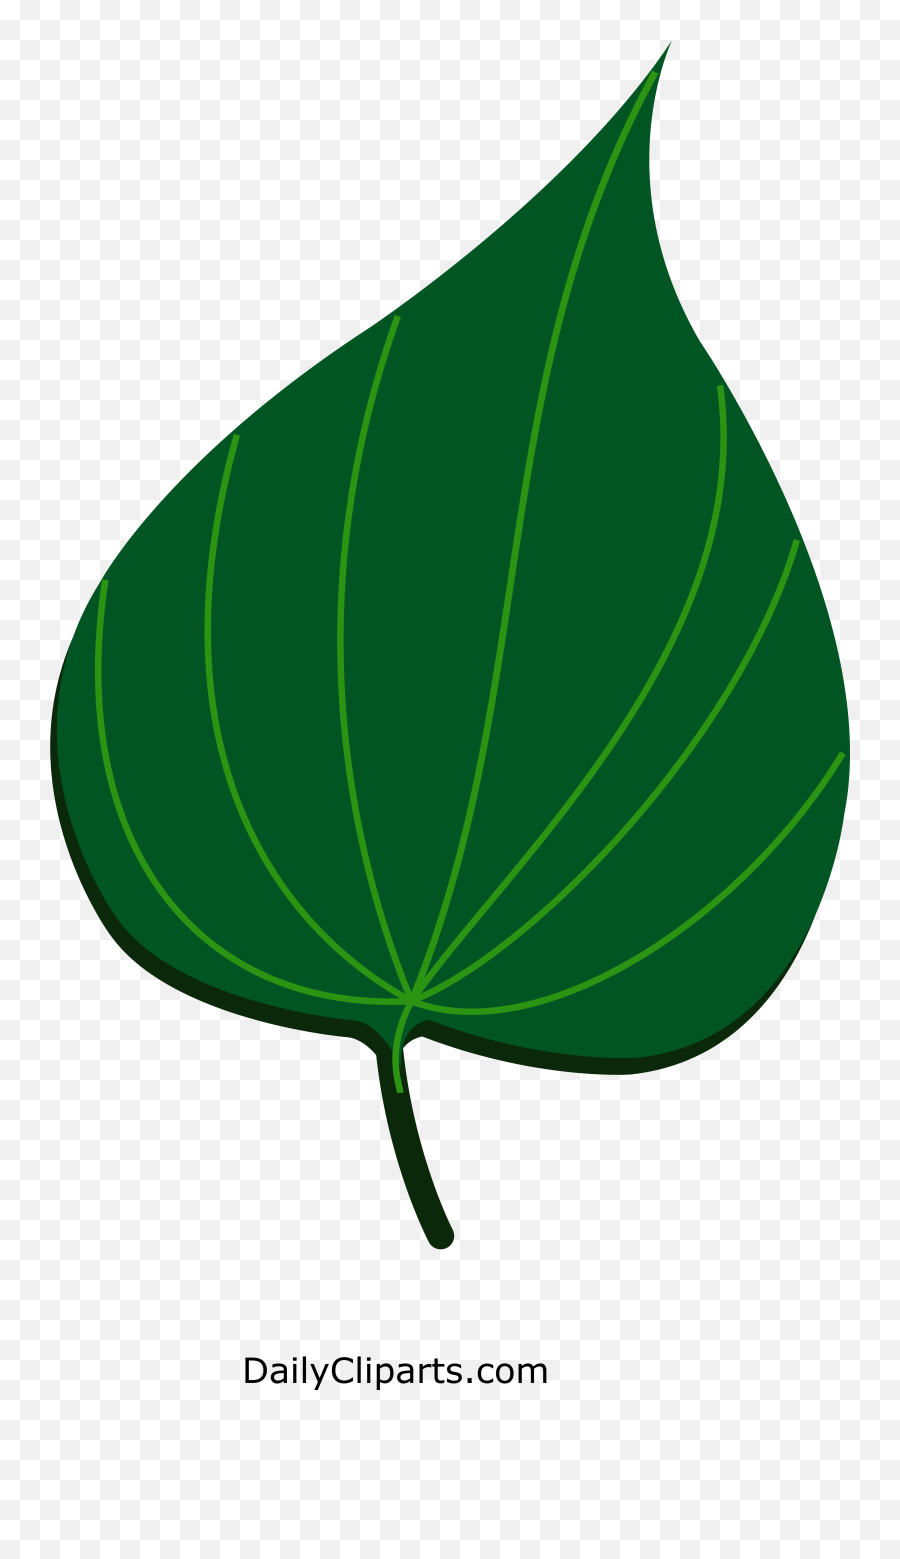 Paan Leaf Clipart Image Icon For Free Download Print Daily - Betel Leaf Clip Art Png,Icon For